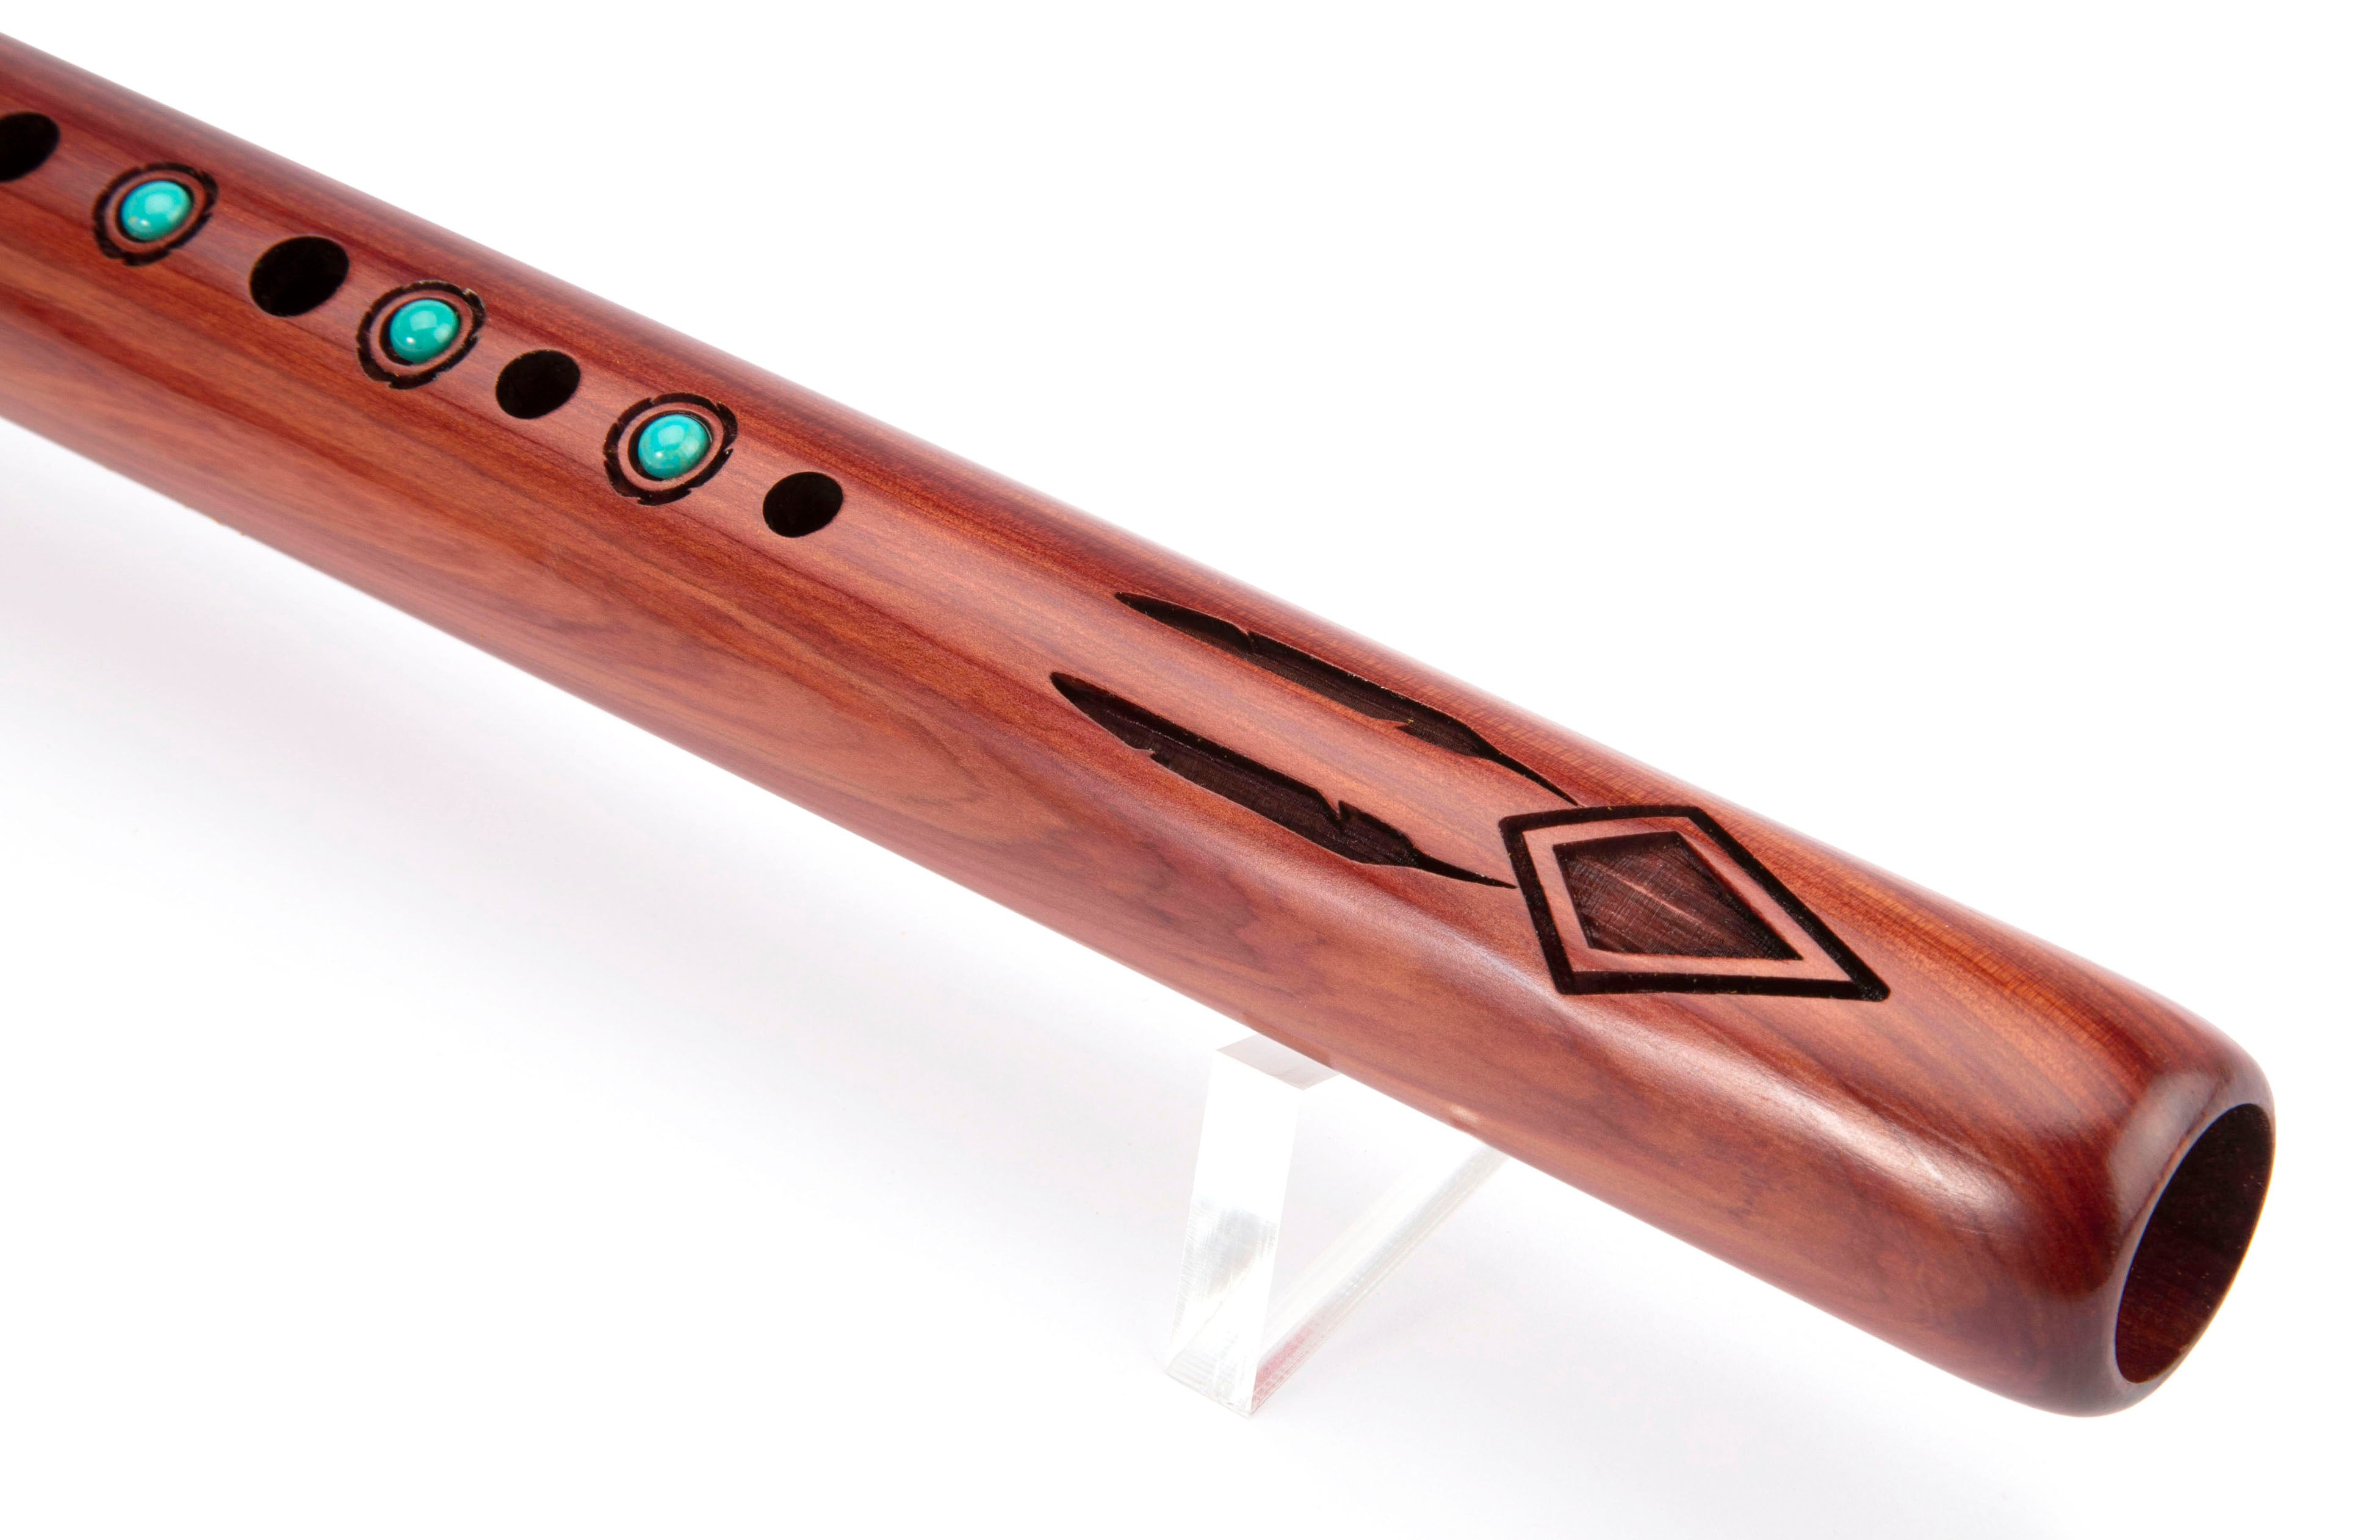 Preservation Golden Eagle "F♯" - Aromatic Cedar & Turquoise (all sales final)